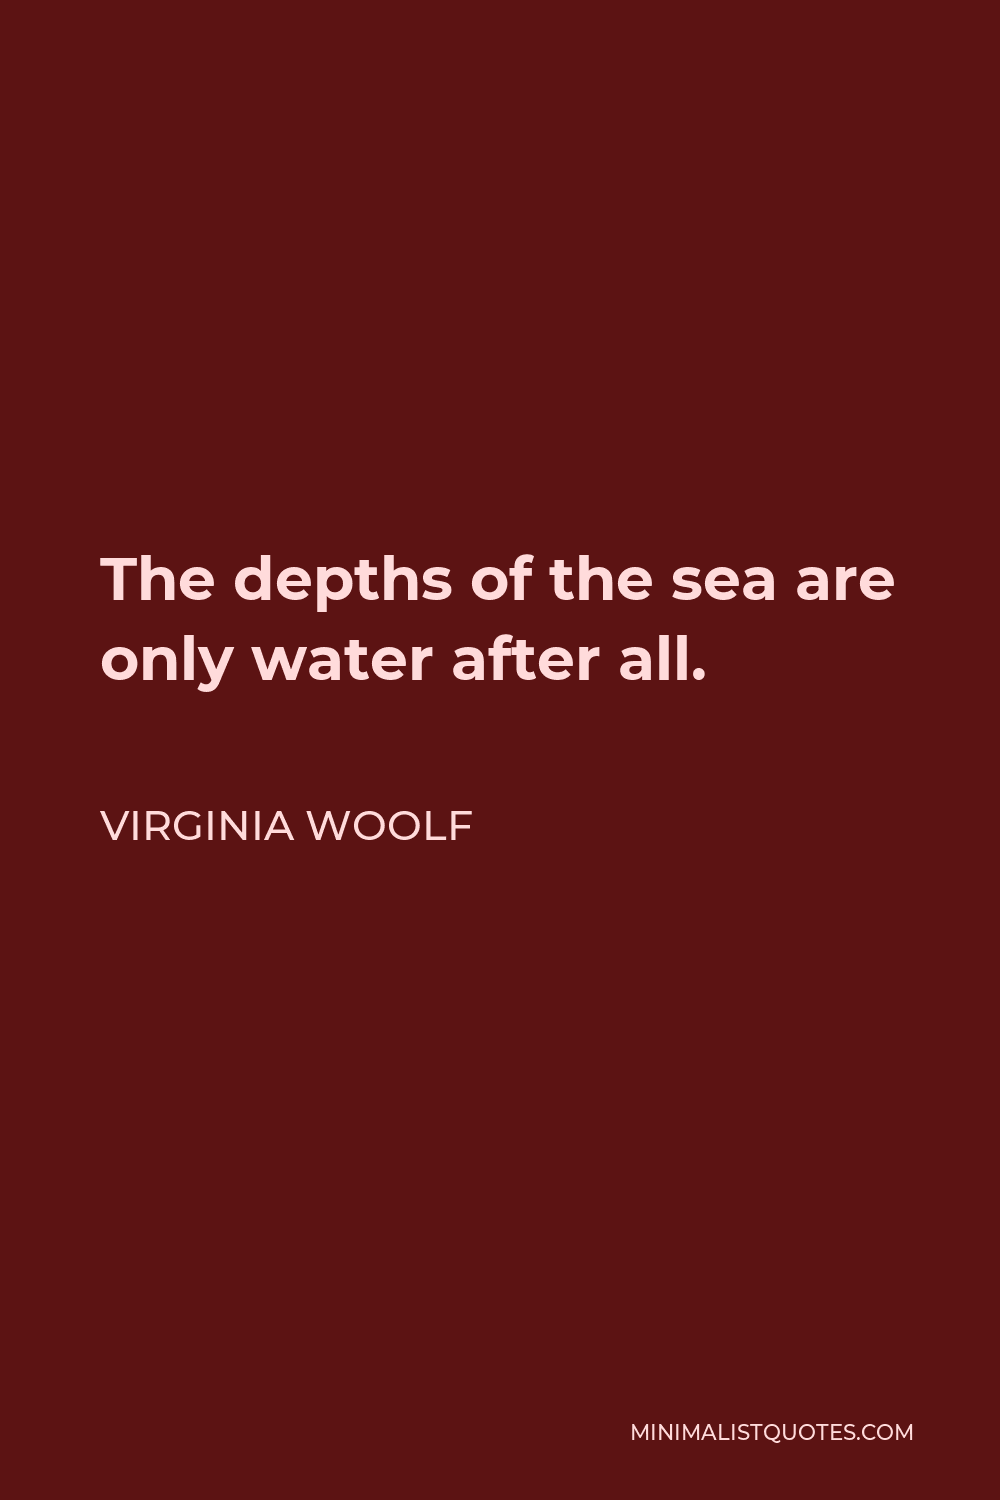 Virginia Woolf Quote - The depths of the sea are only water after all.